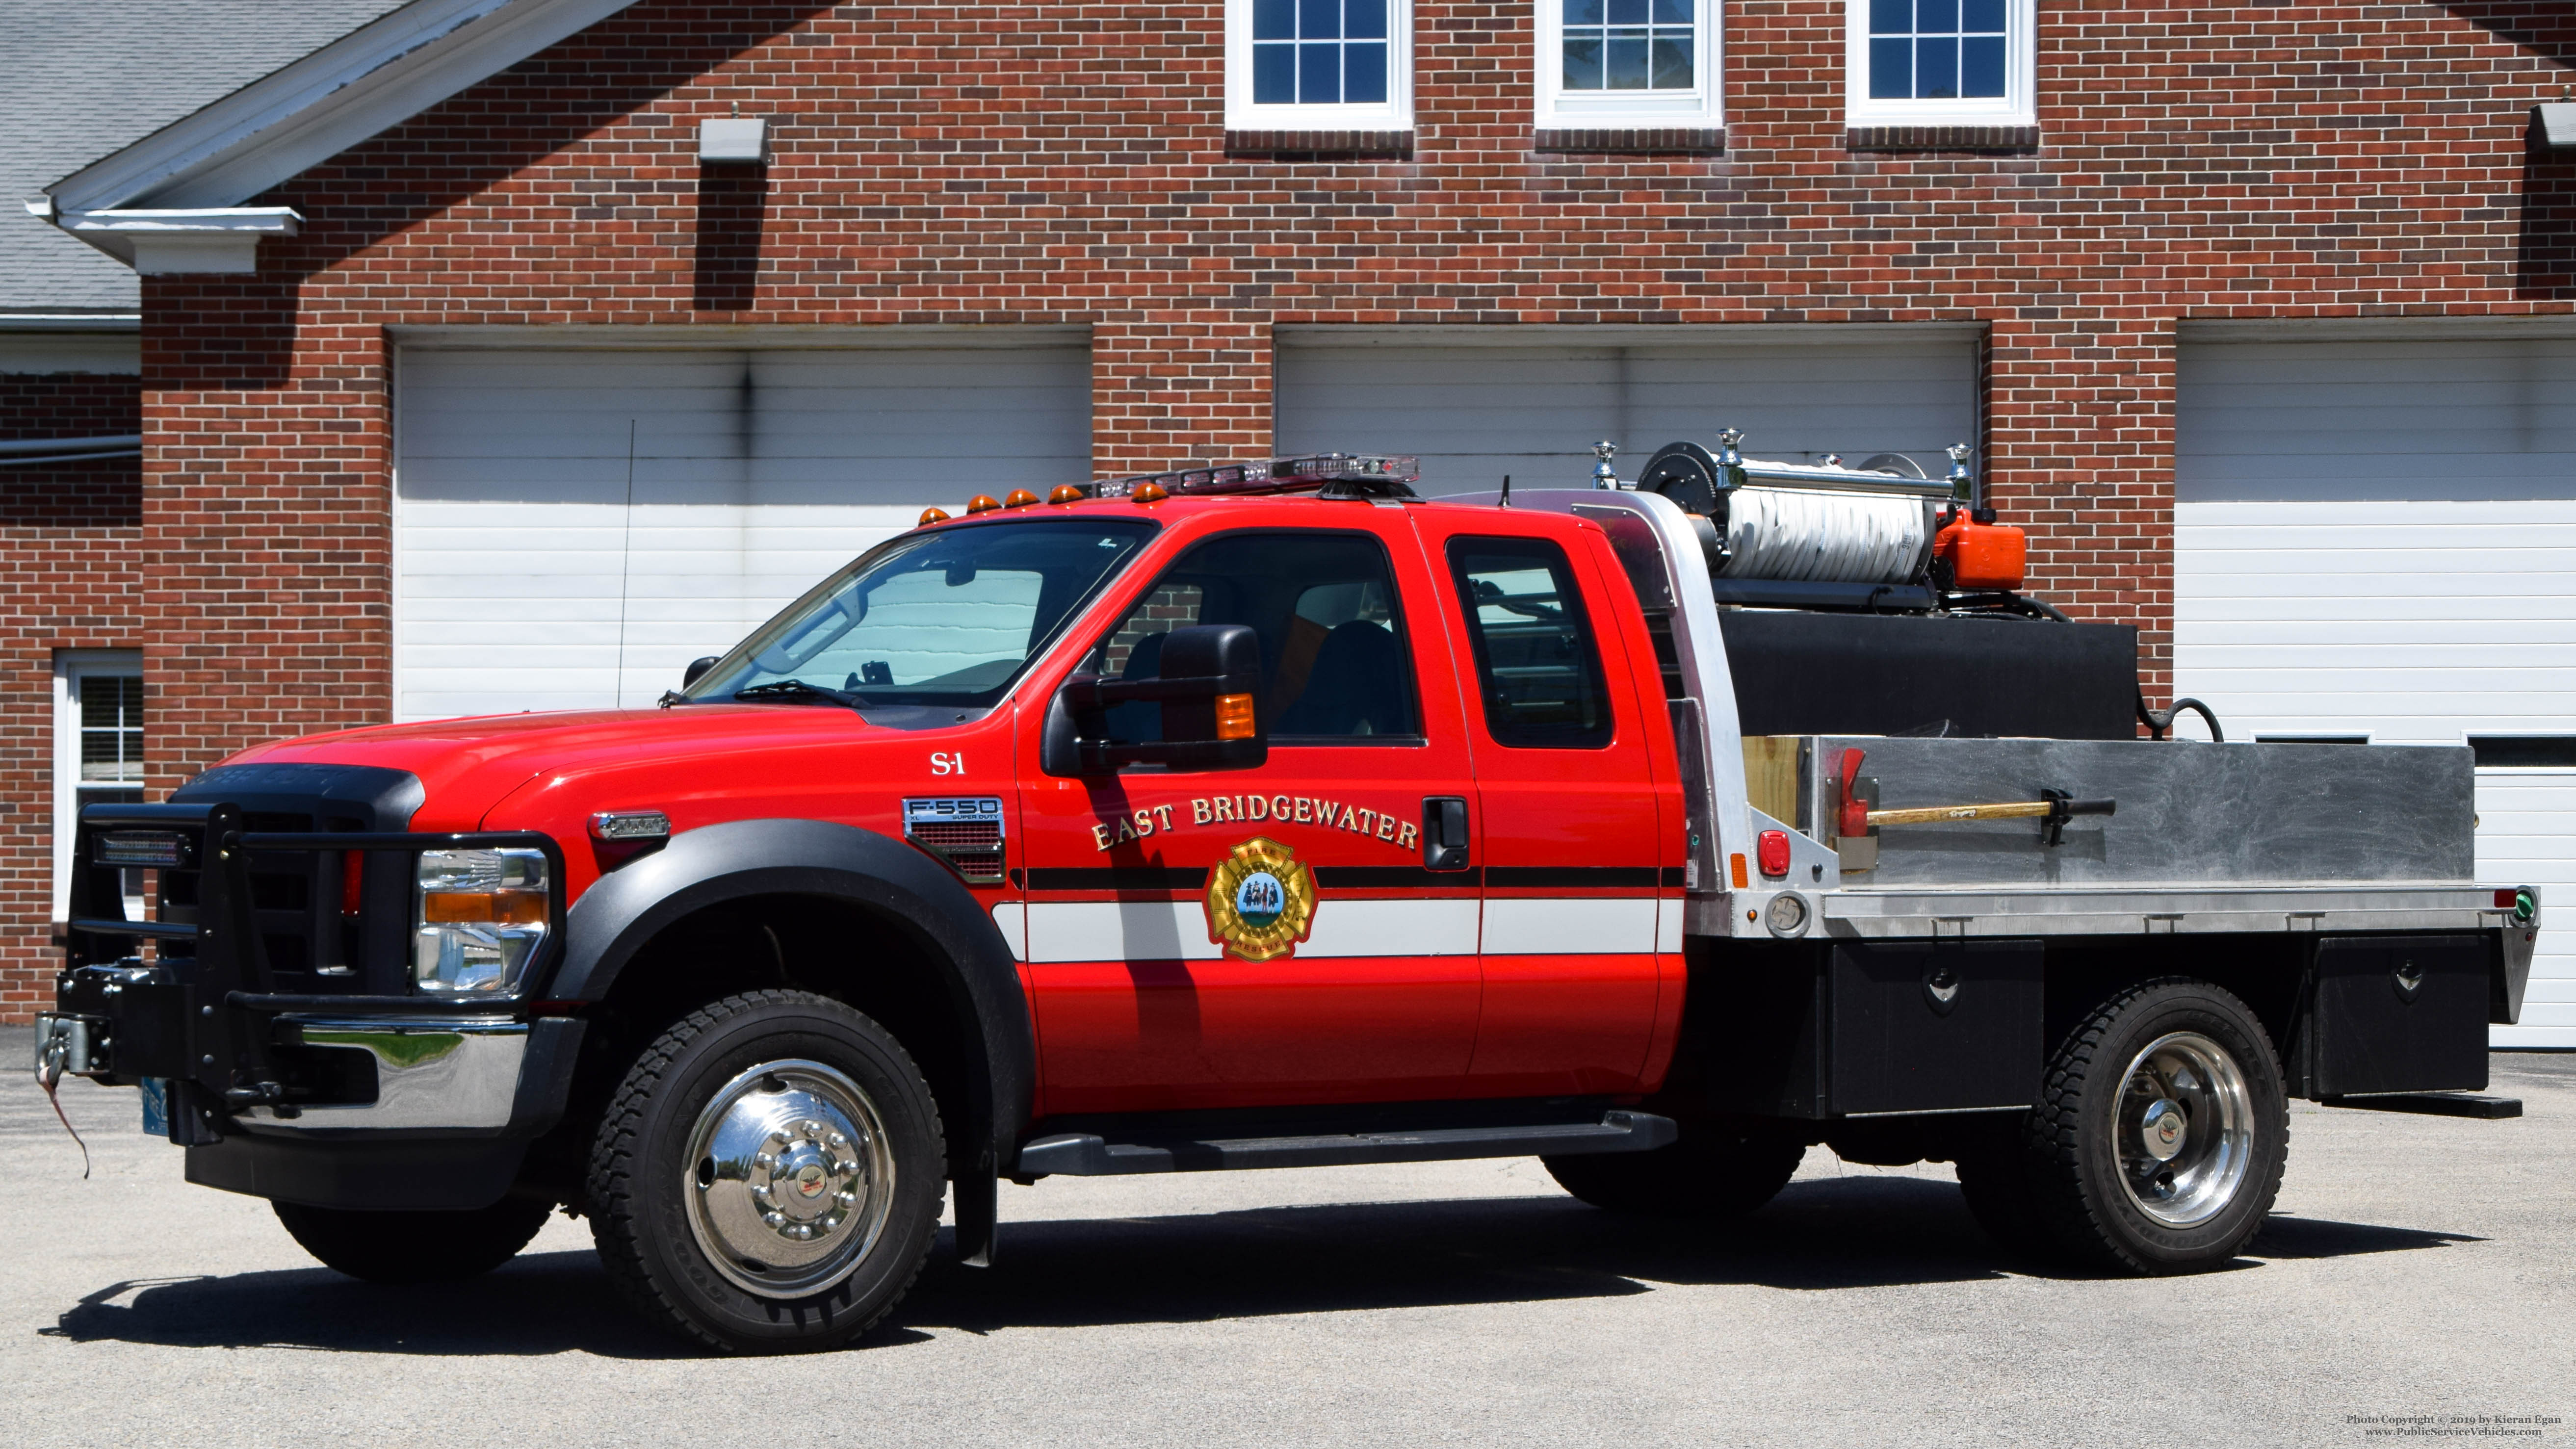 A photo  of East Bridgewater Fire
            Forest Fire 2, a 2009 Ford F-550 Crew Cab             taken by Kieran Egan